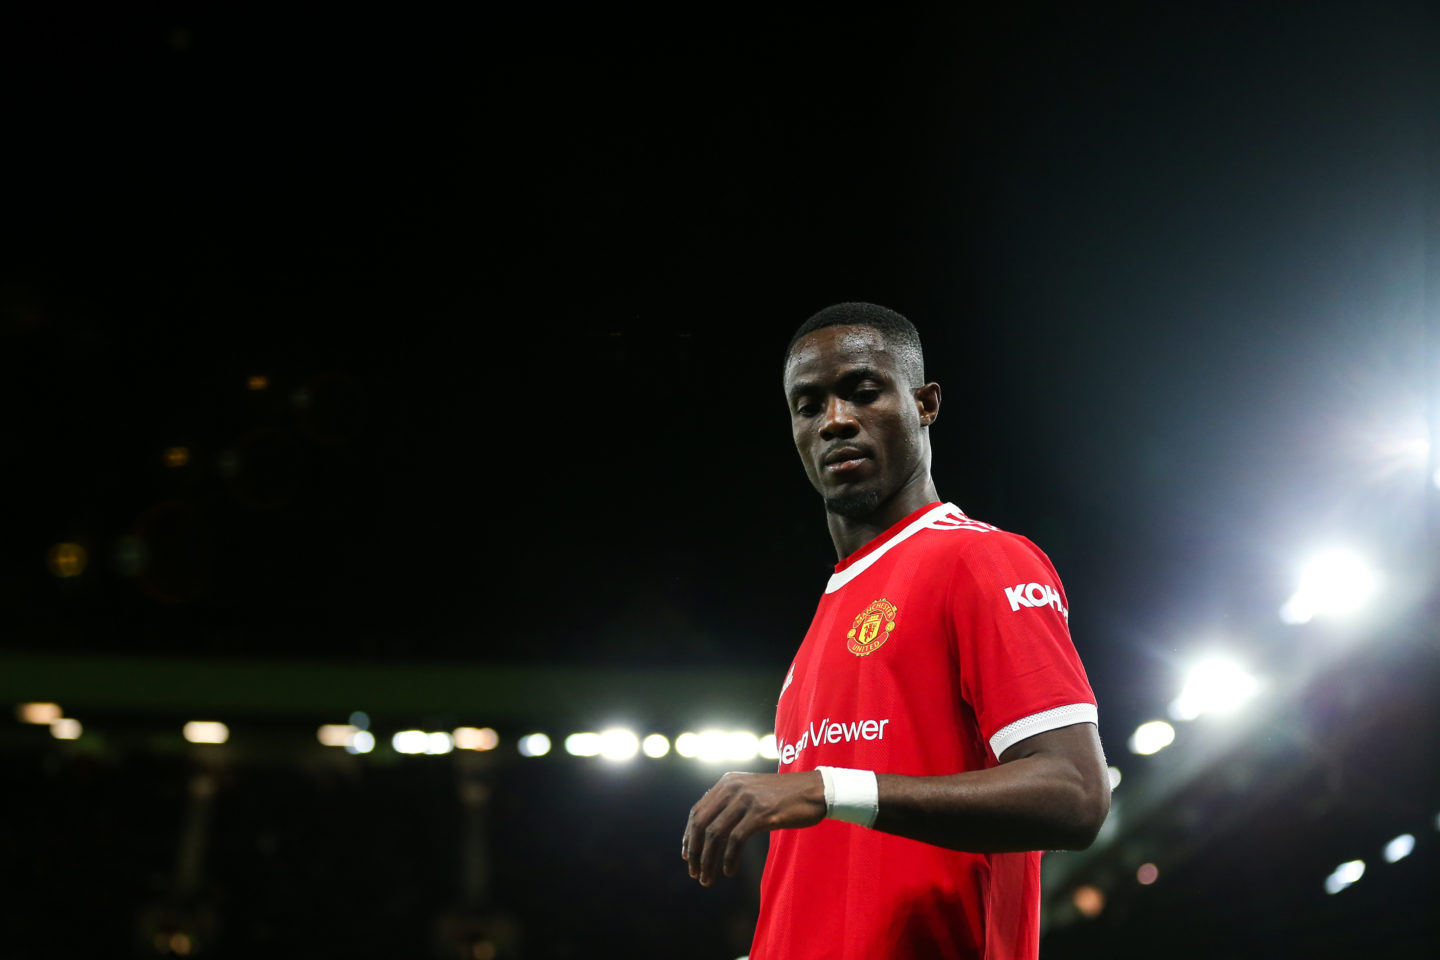 Eric Bailly has leapfrogged the other candidates for the Milan defense, but the talks with Manchester United have gotten off on the wrong foot.